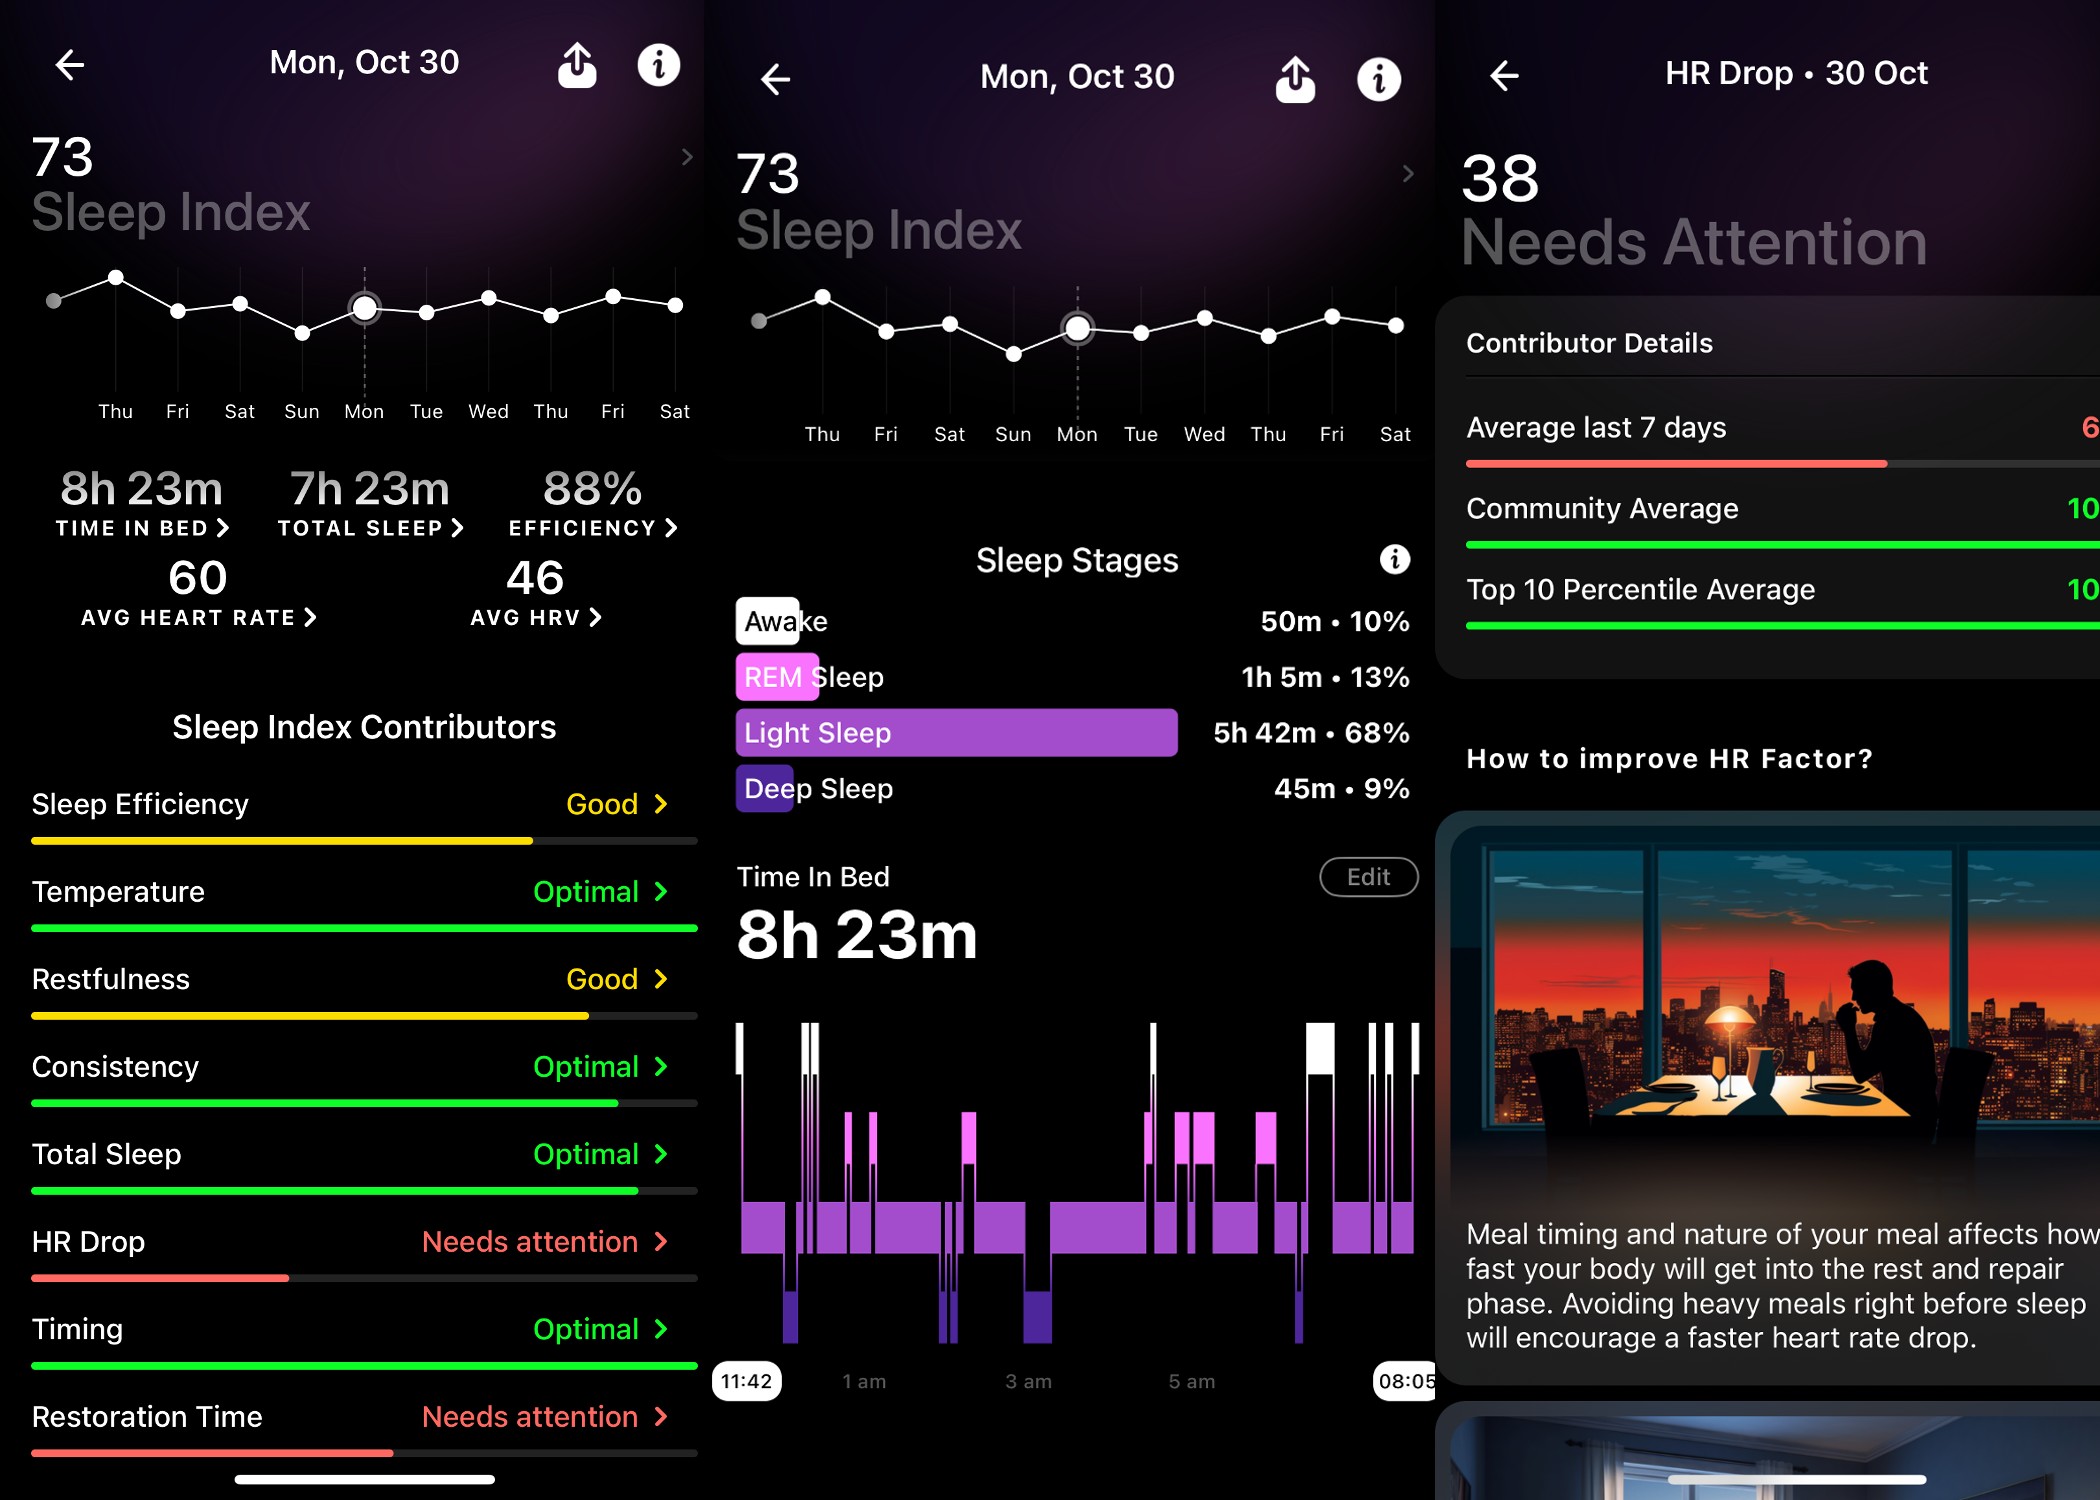 The sleep tracker offers detailed statistics with advice.